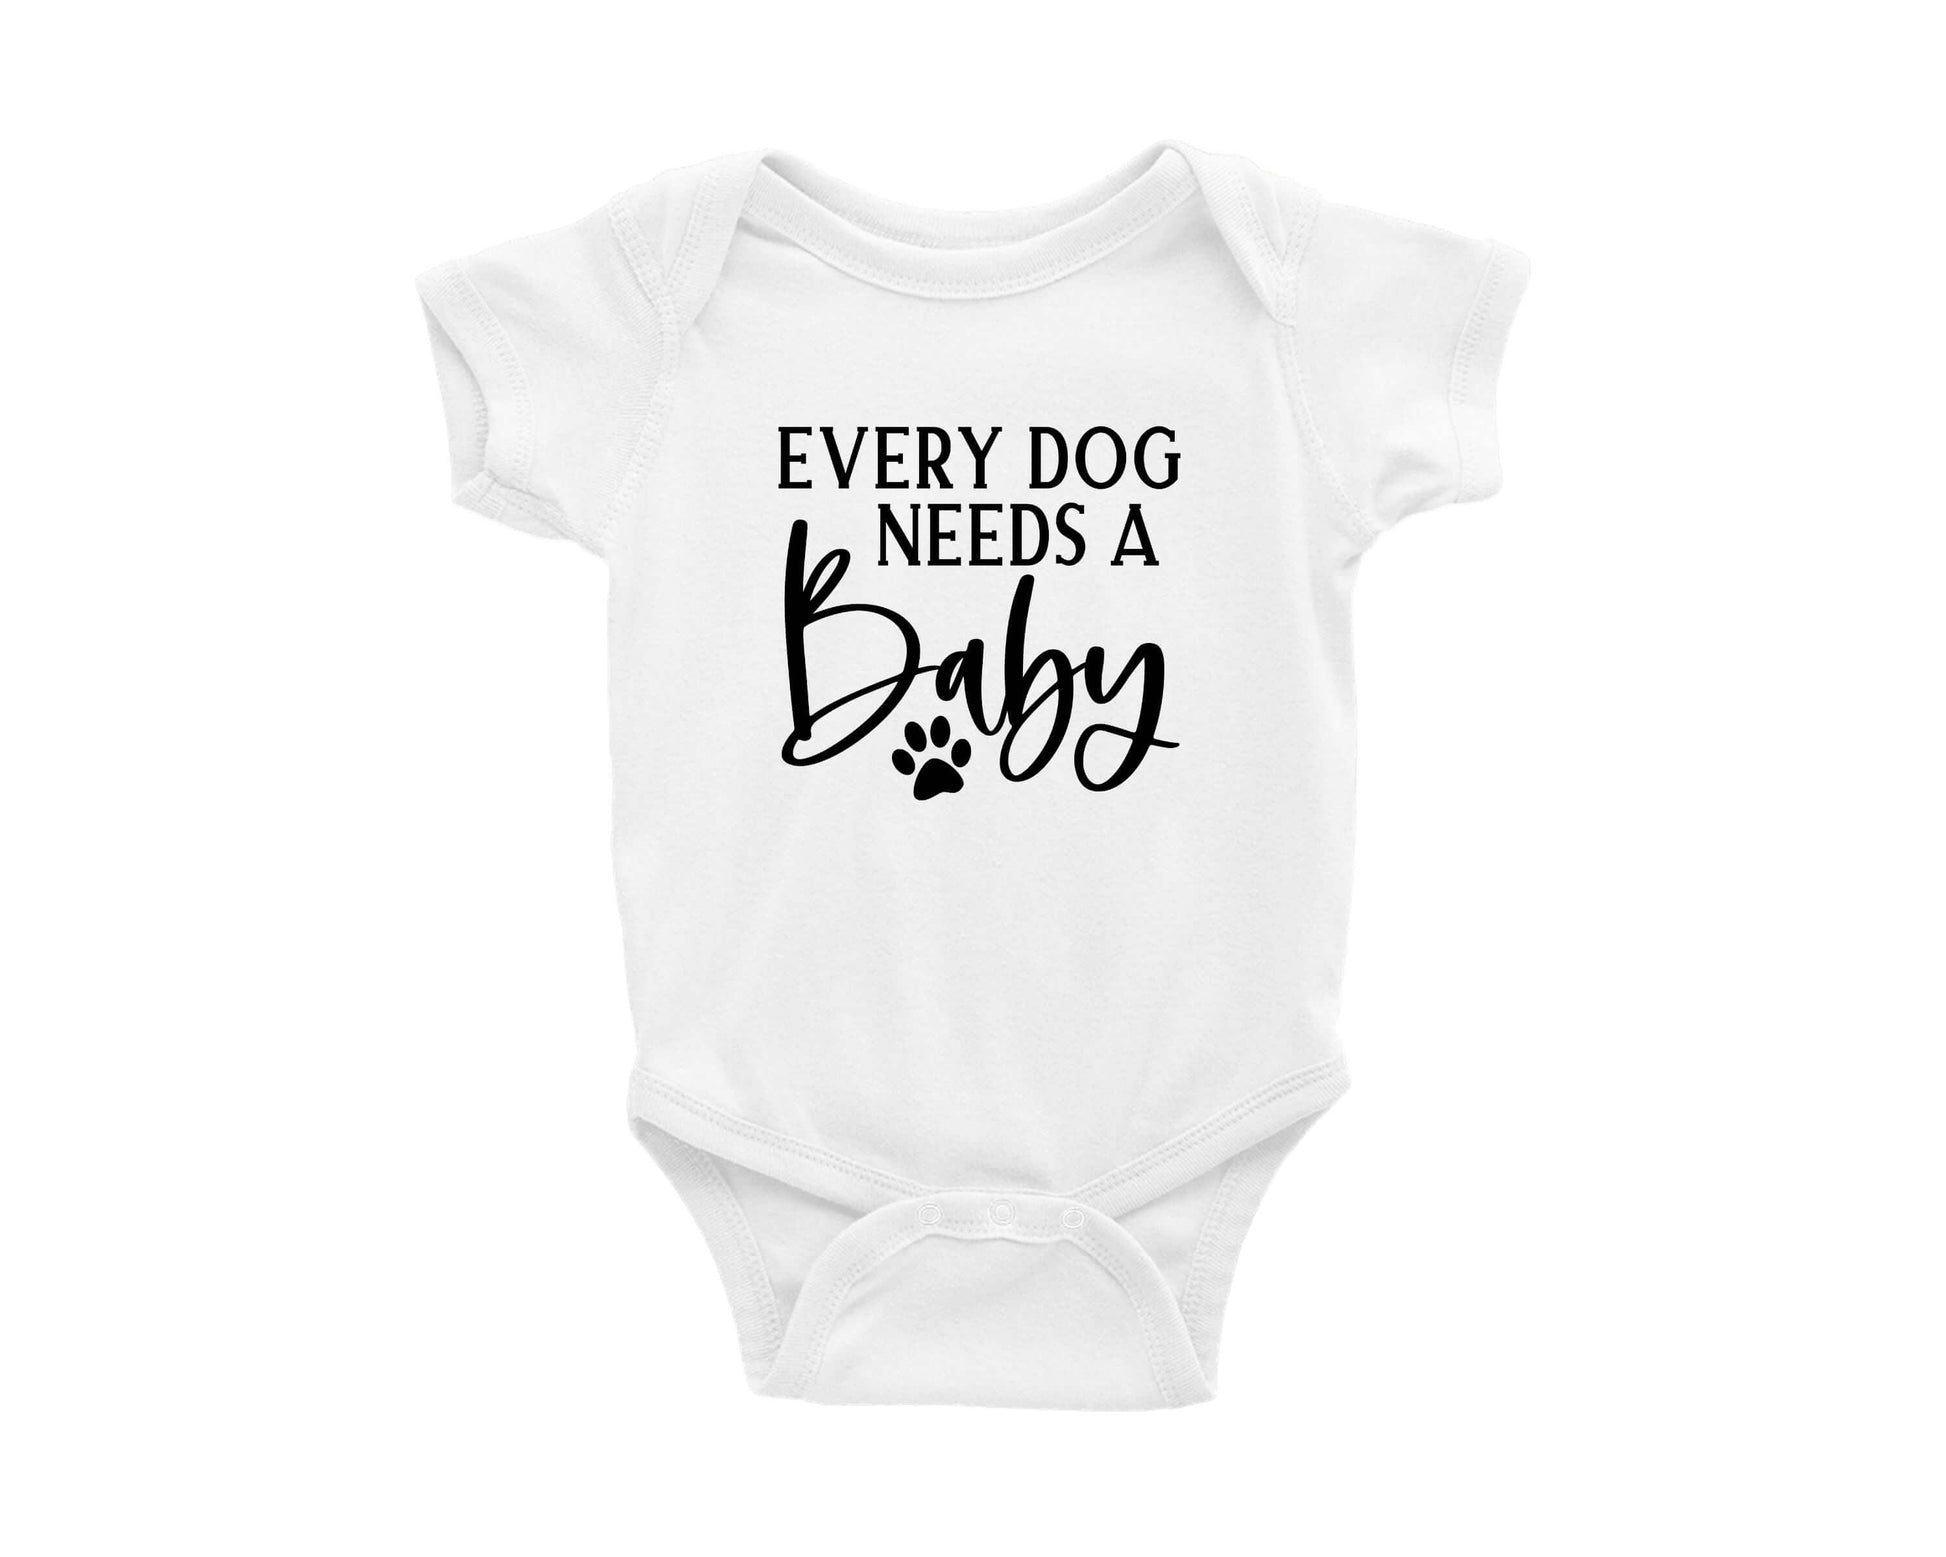 Every Dog Needs a Baby Onesie - Crystal Rose Design Co.